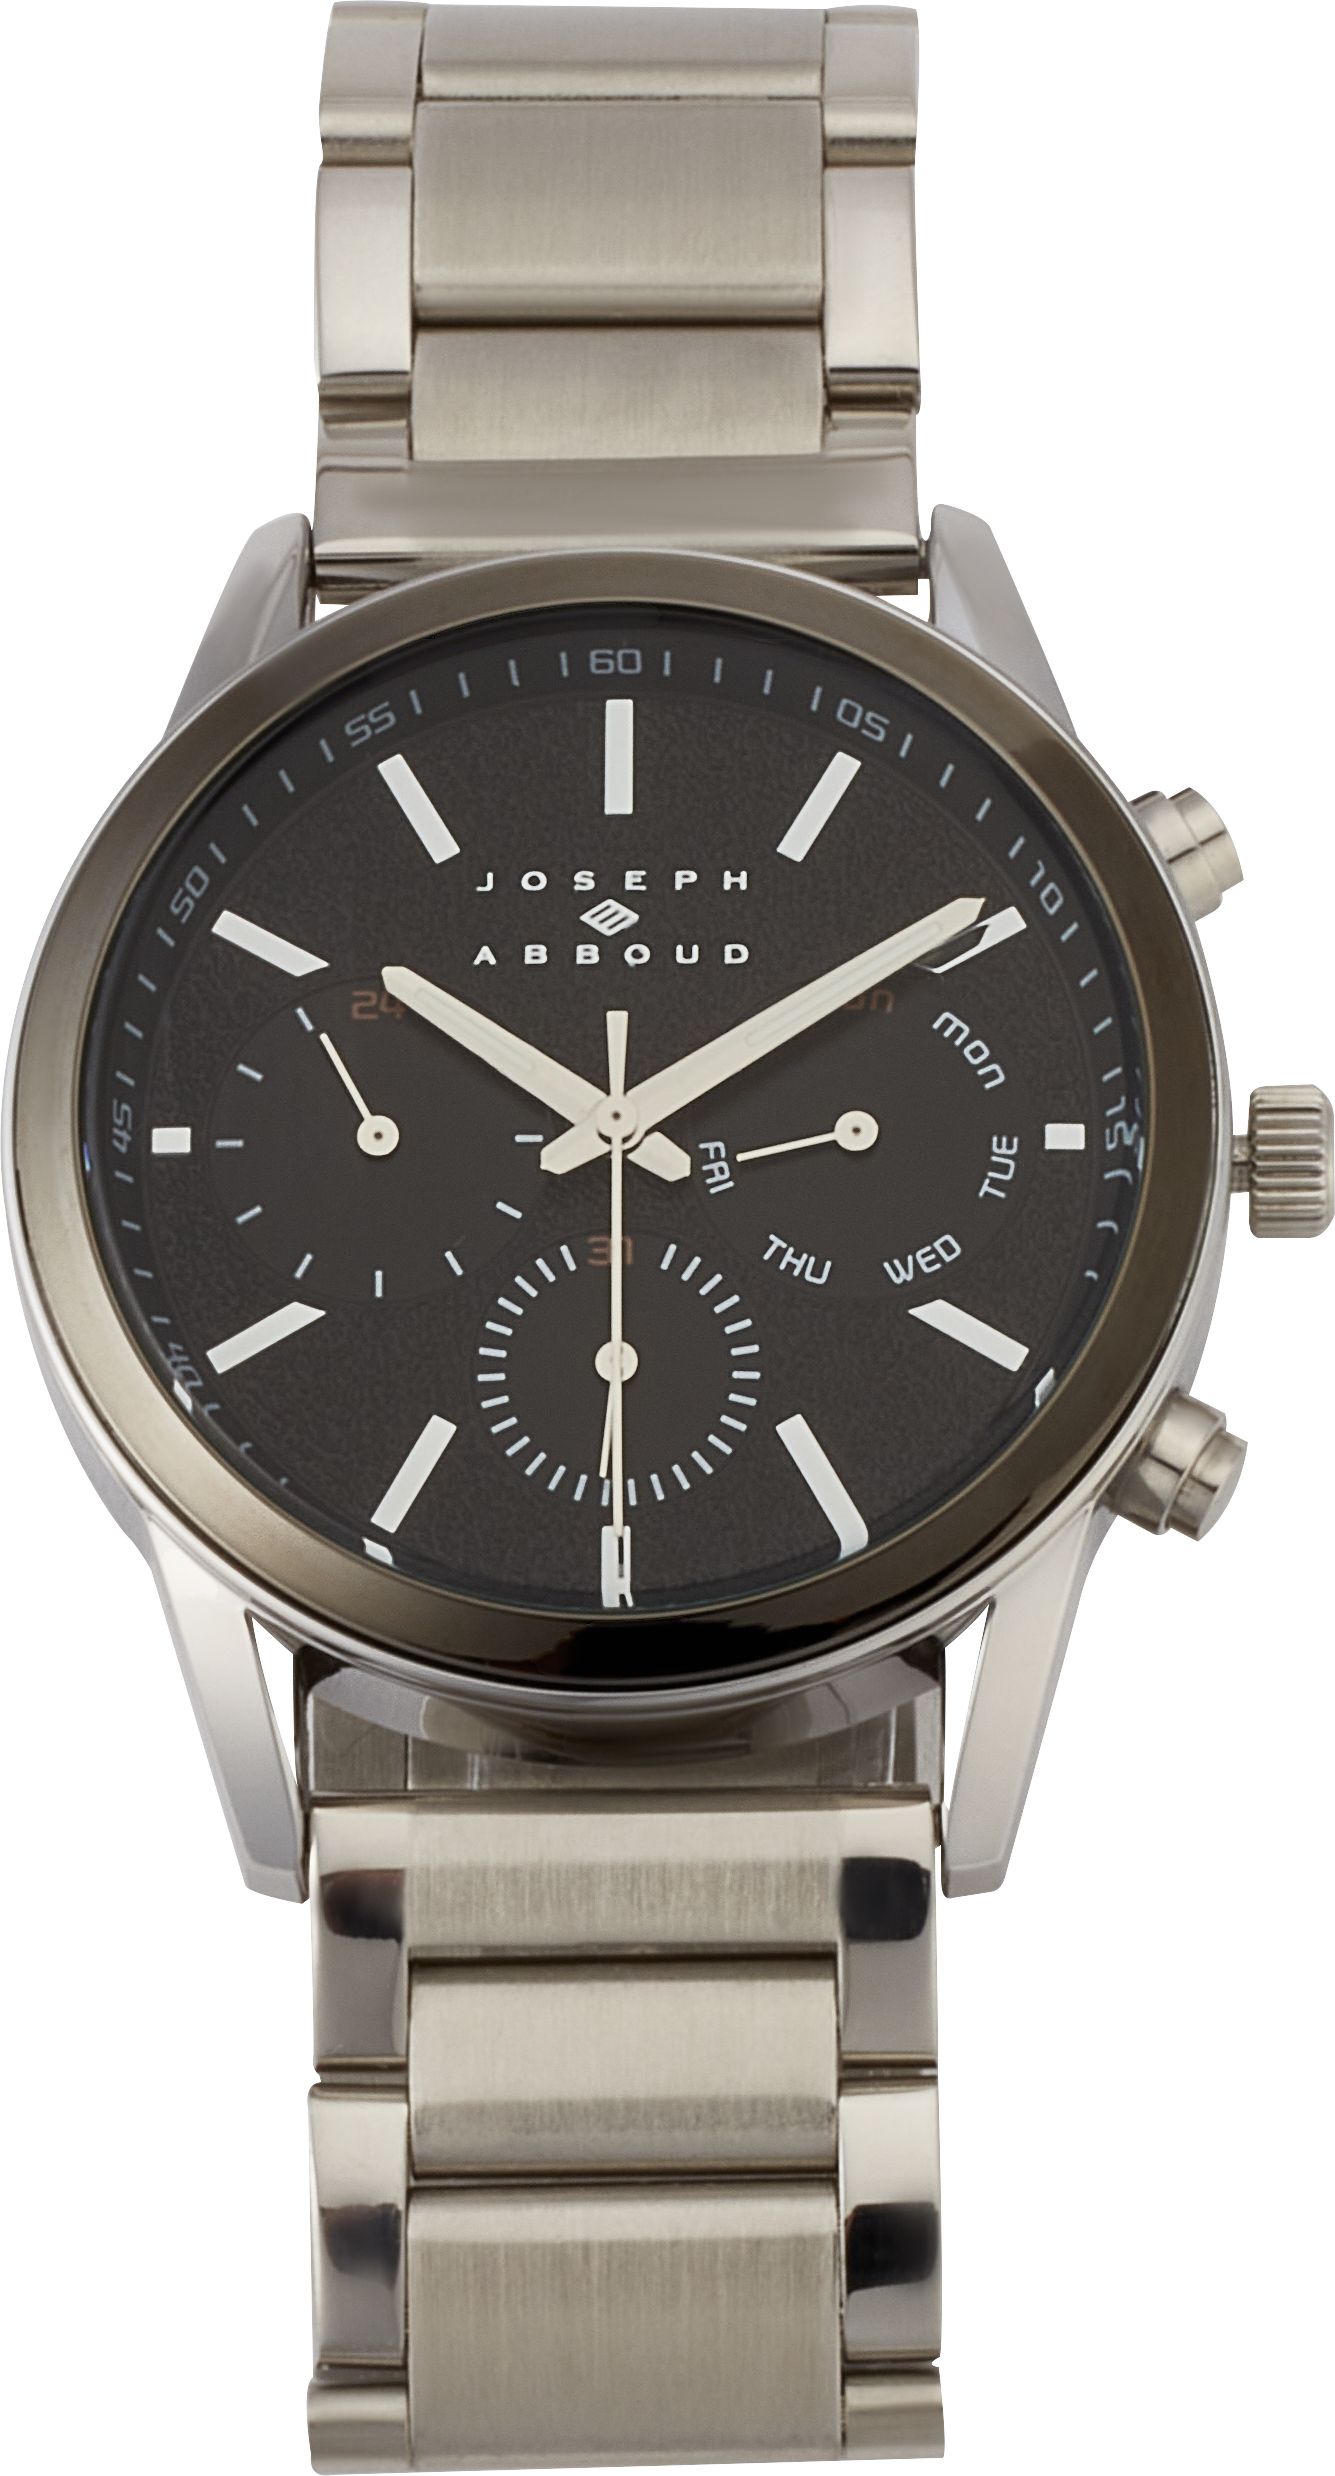 JOSEPH ABBOUD WATCH LINK BAND WITH BLACK DIAL